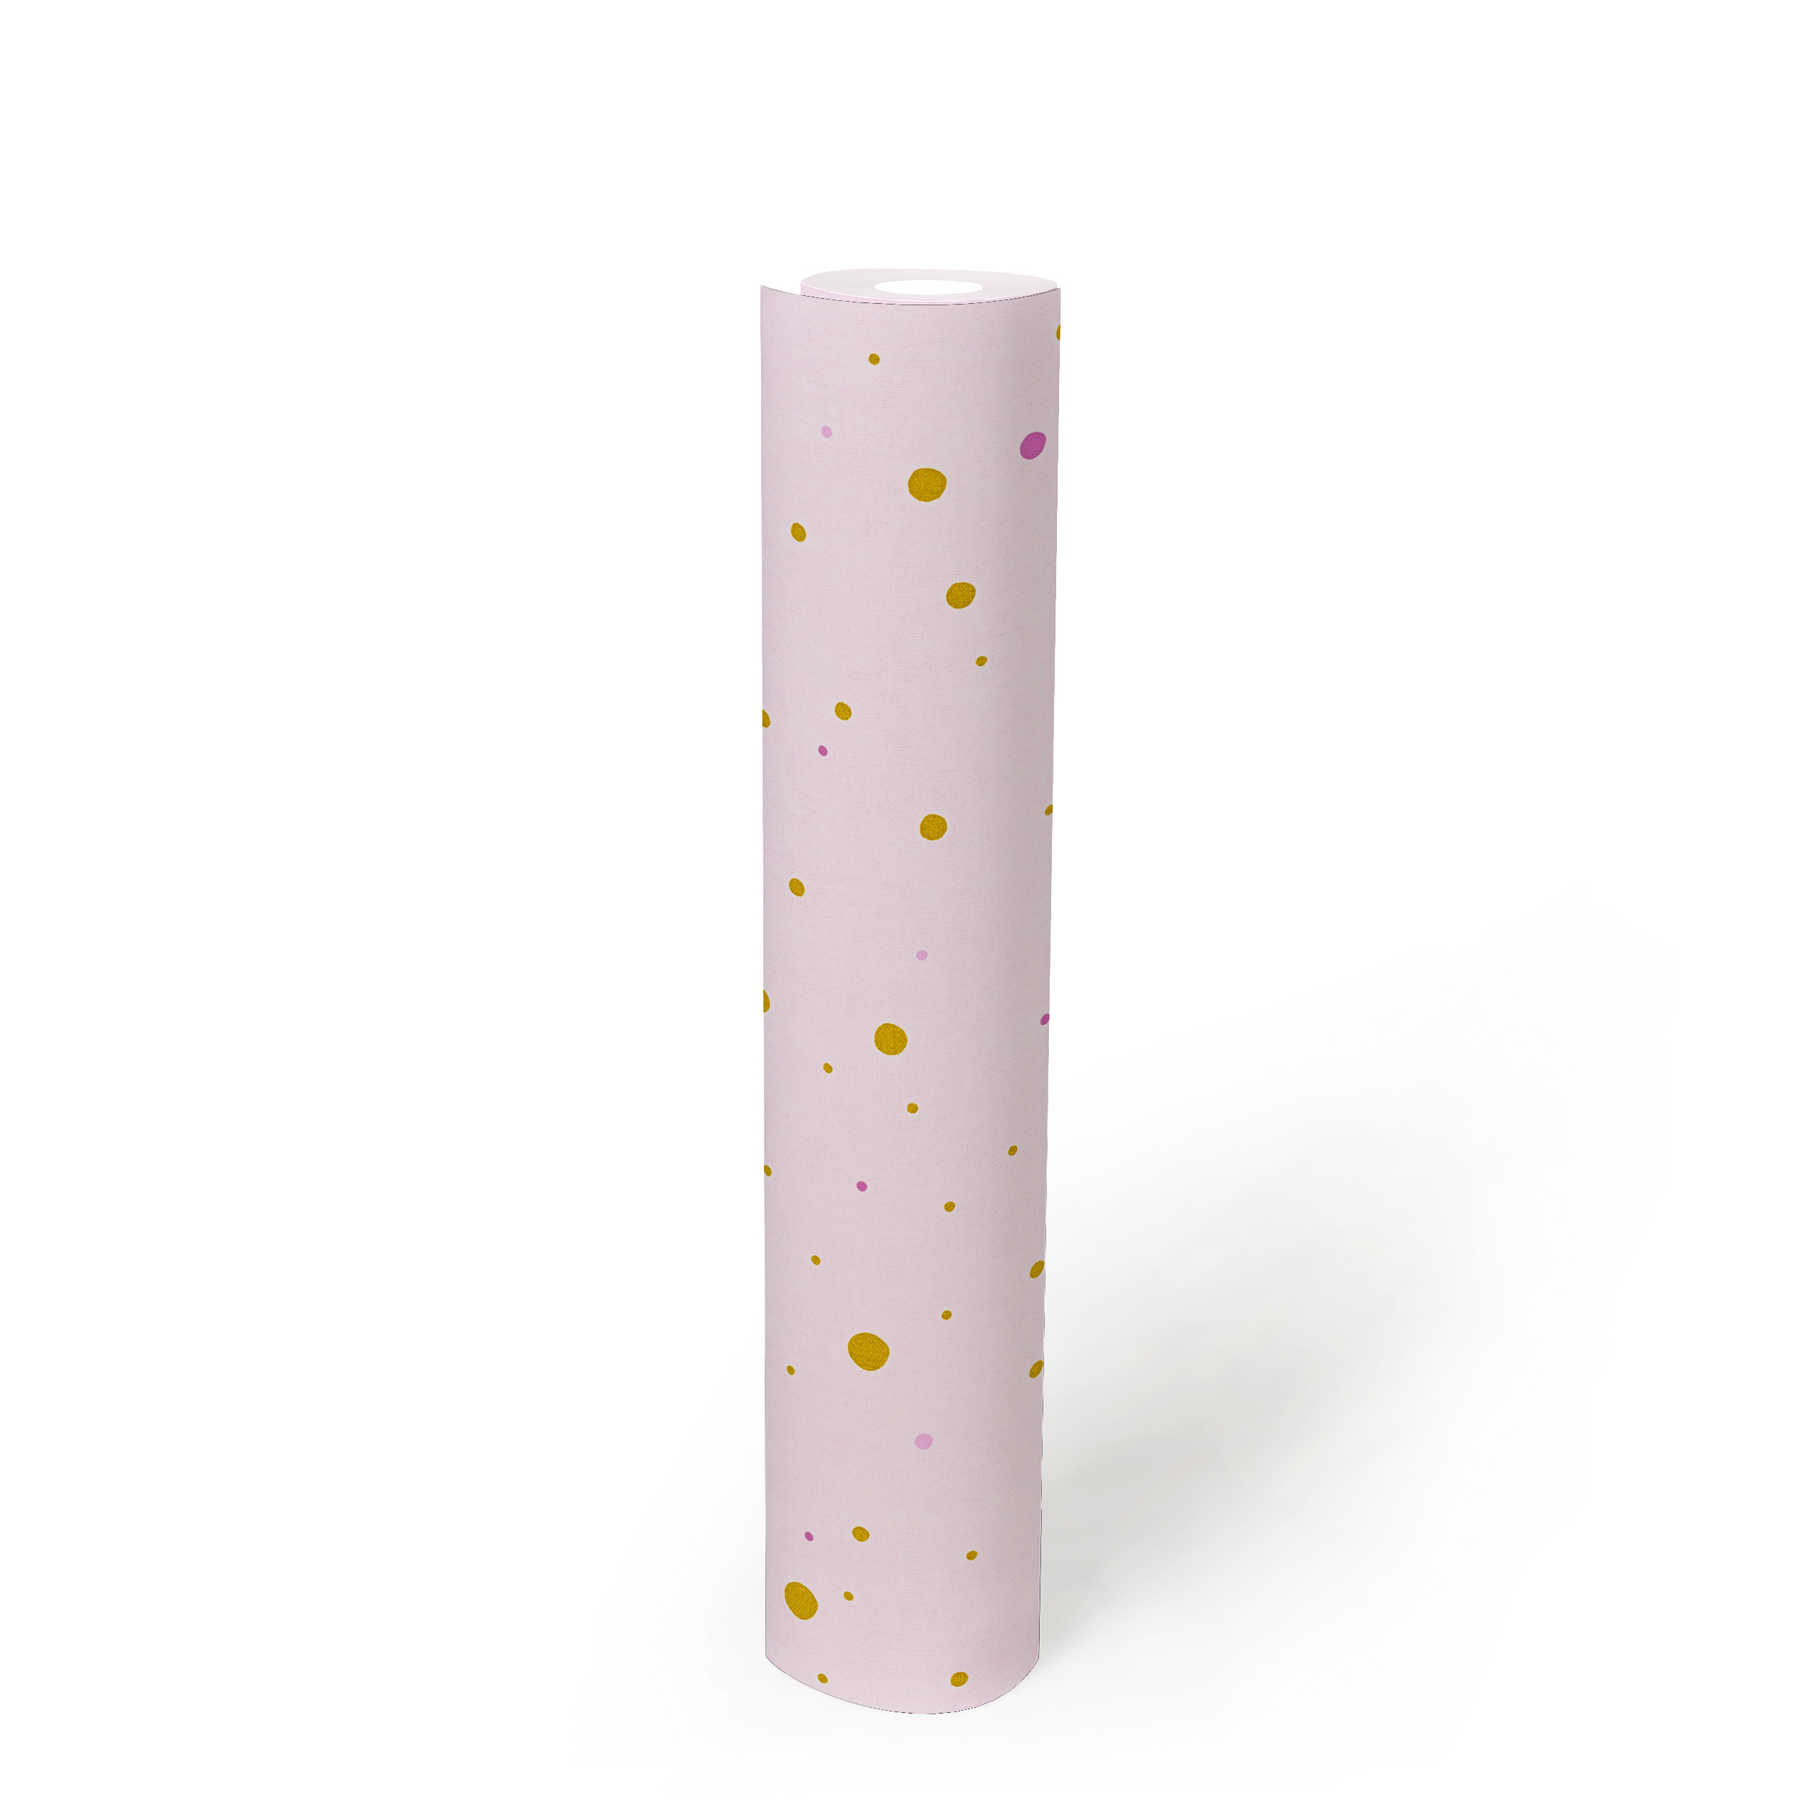             Dots wallpaper for girls with gold accent - Pink
        